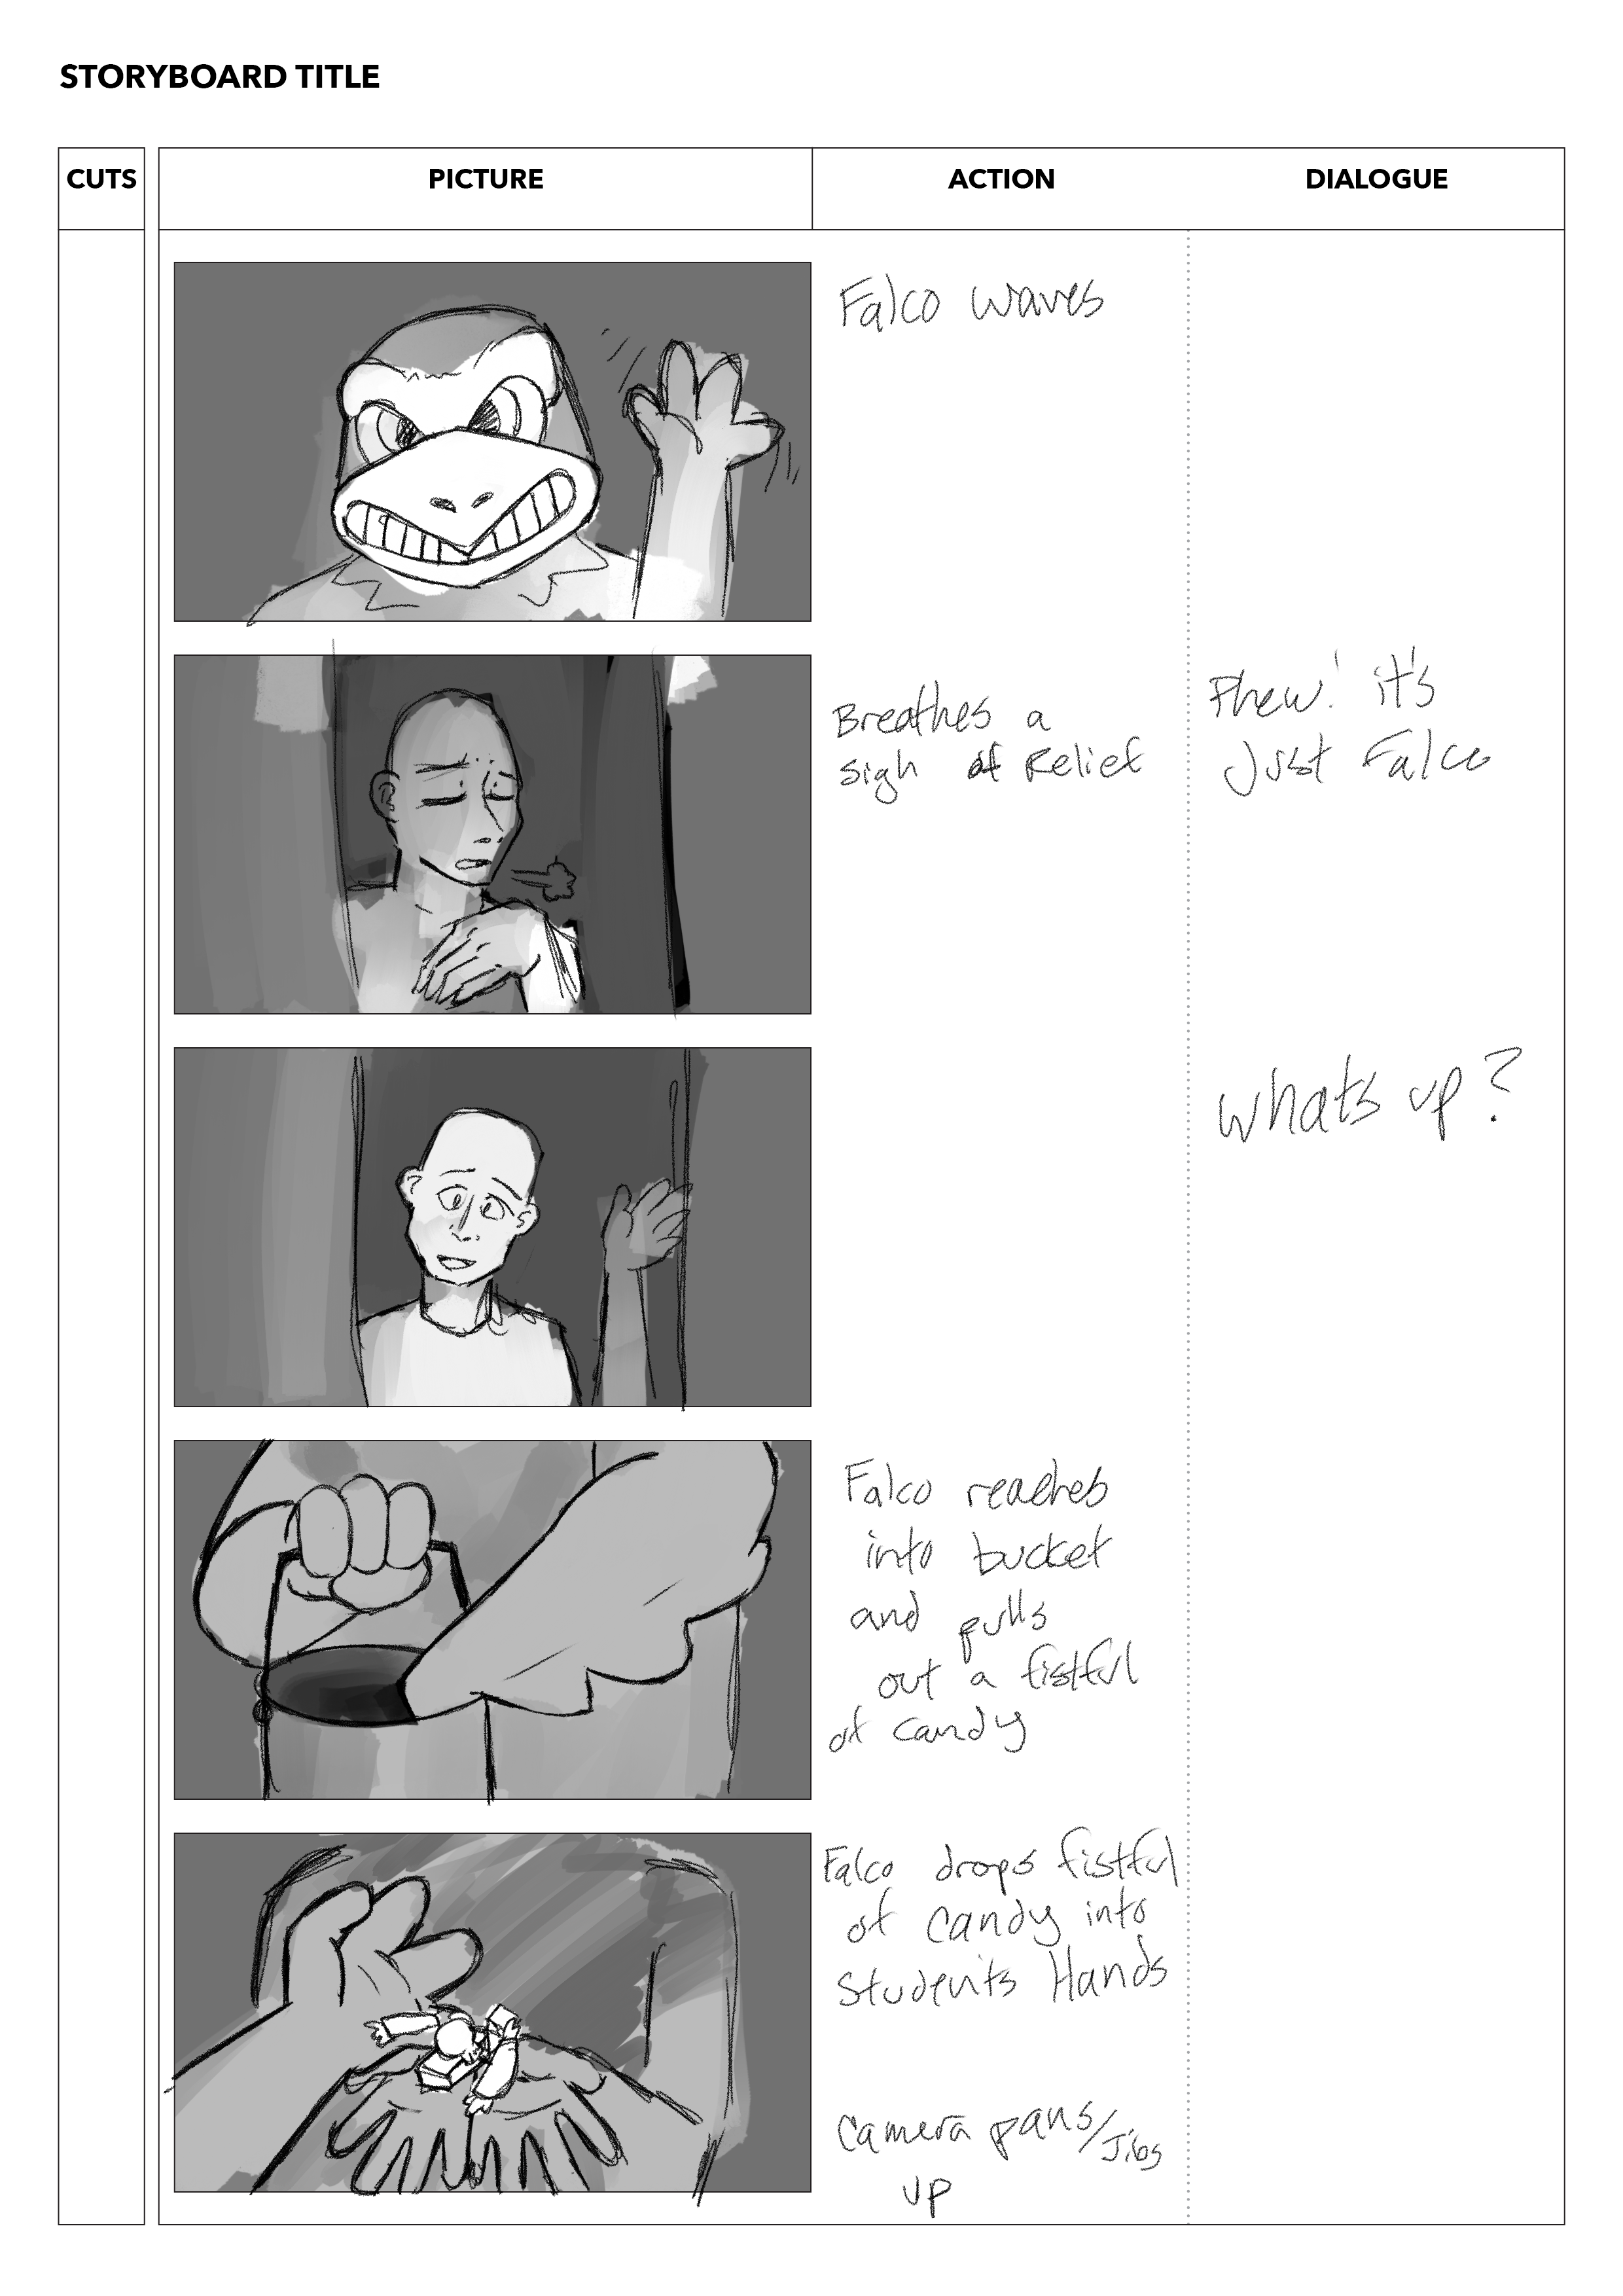 16_9_Storyboard_Template_page 7.png